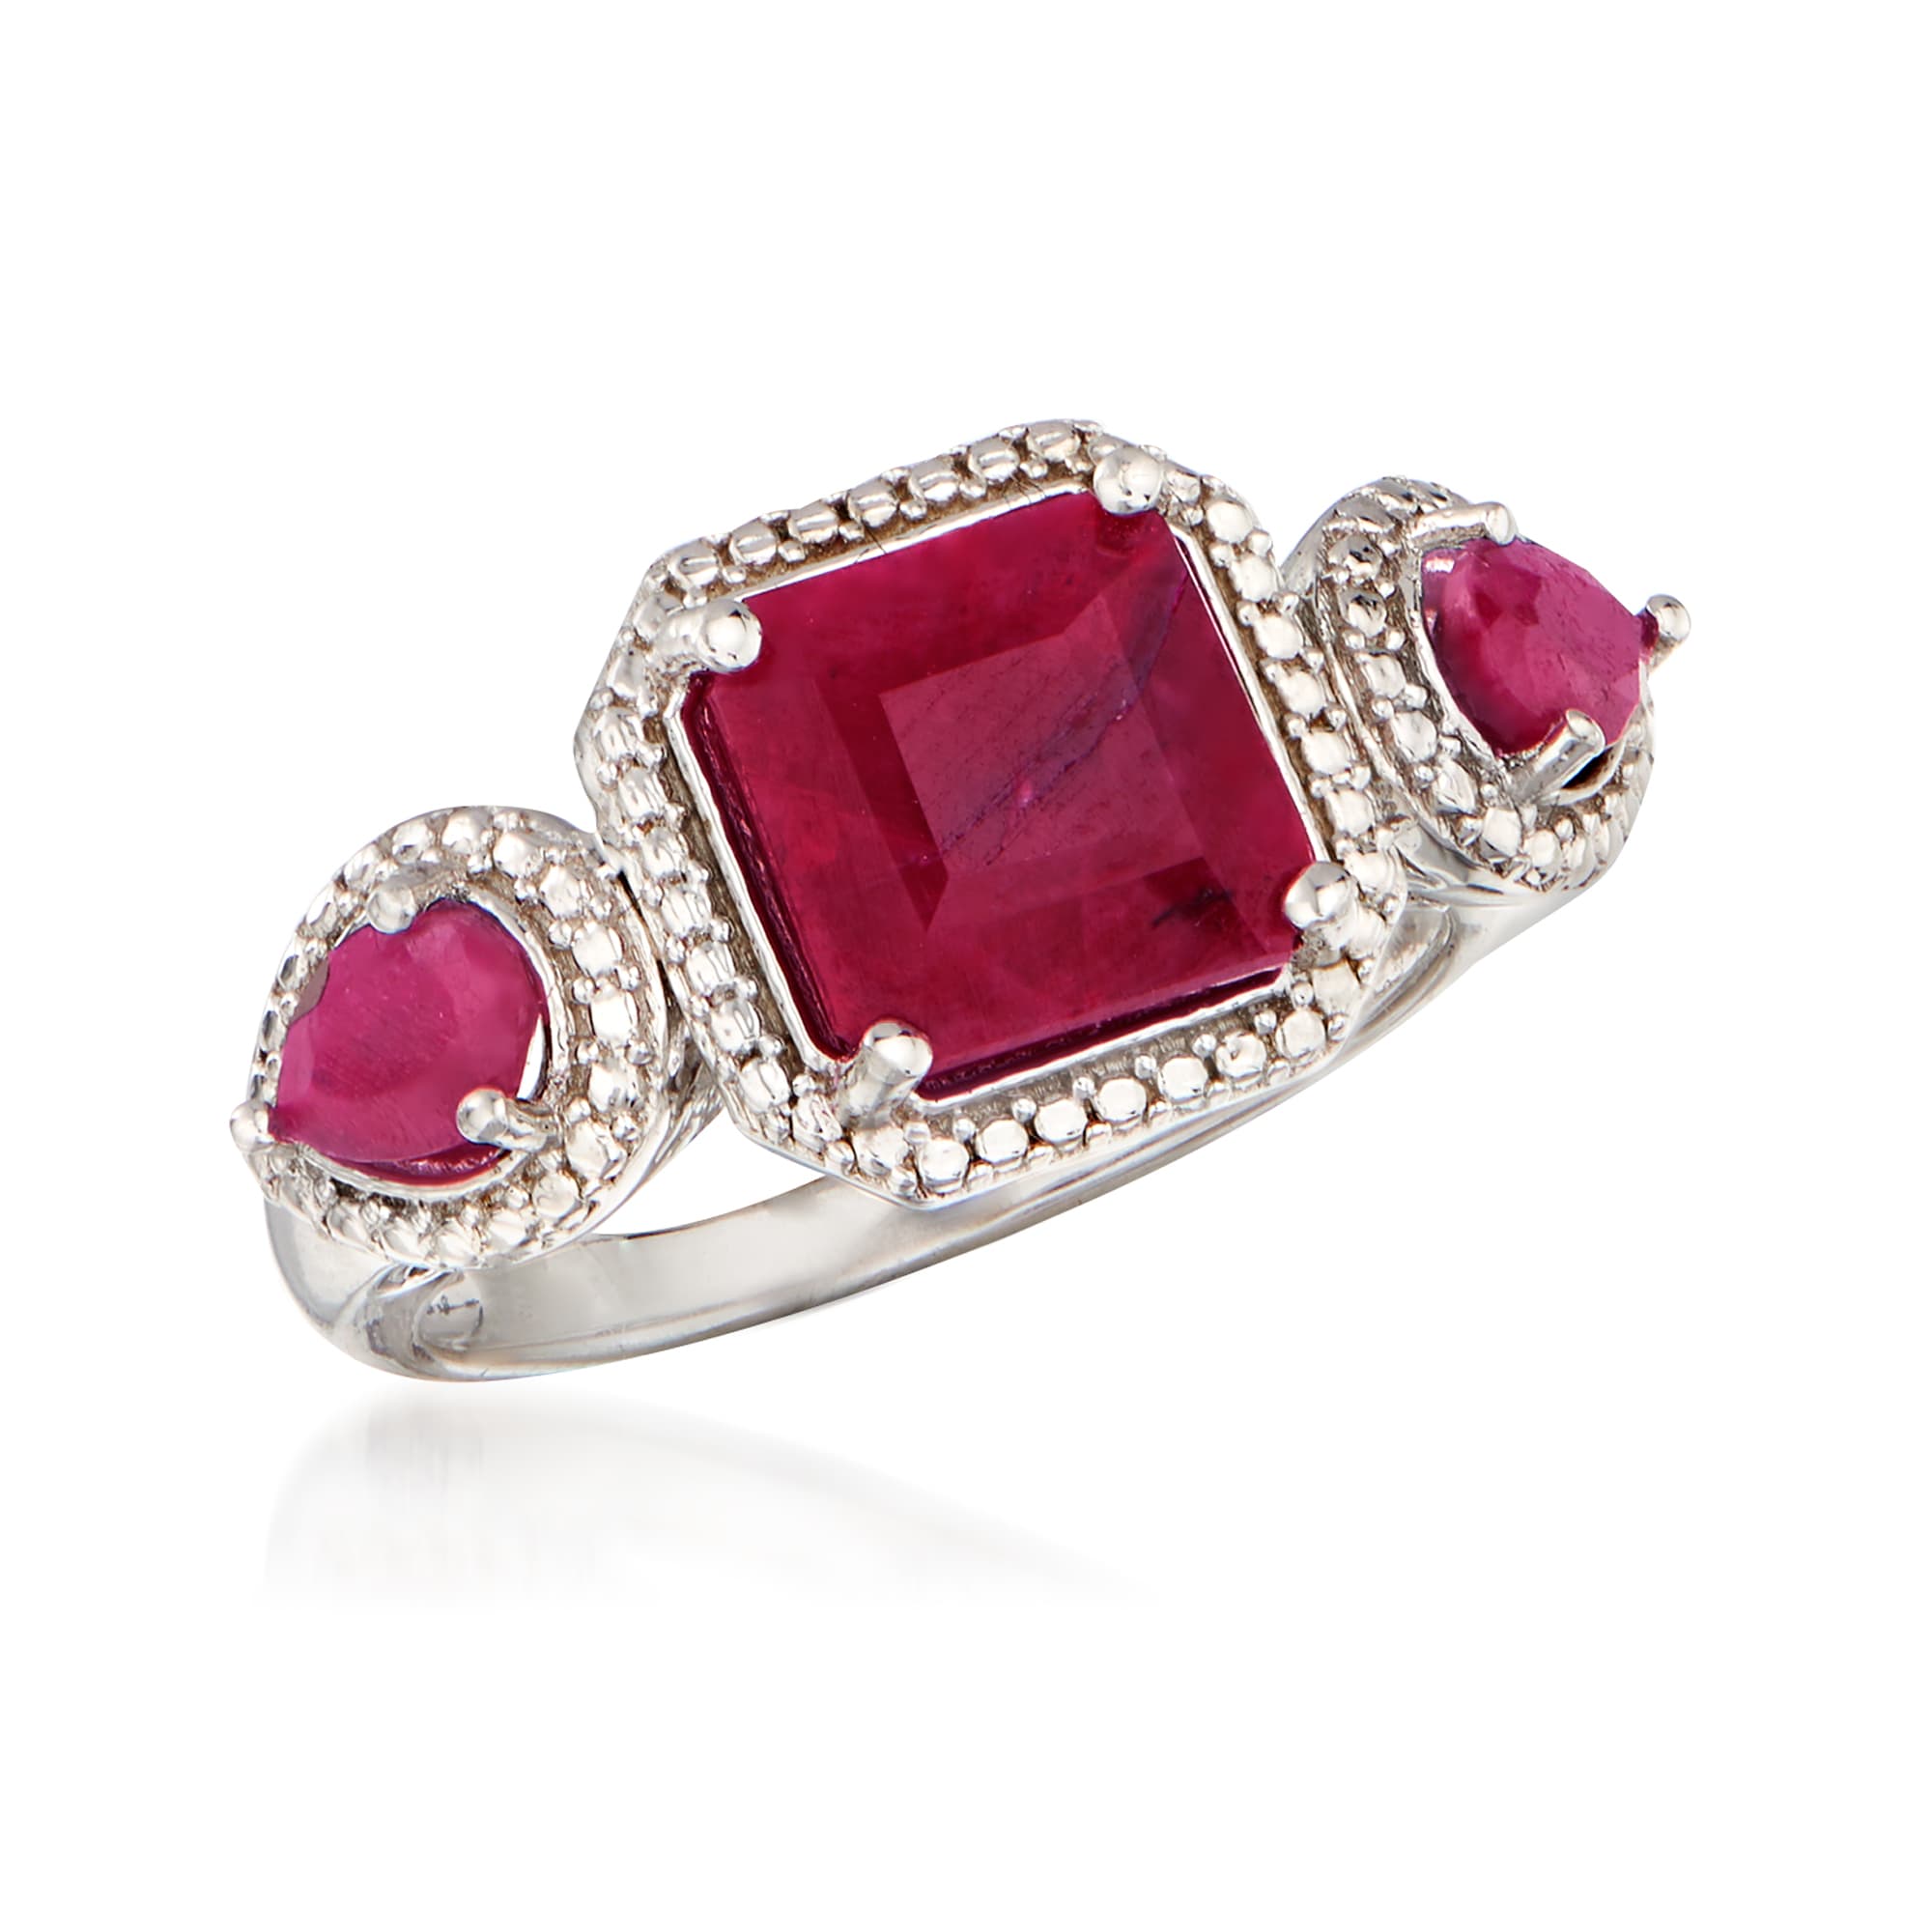 3.40 ct. t.w. Ruby Ring in Sterling Silver | Ross-Simons